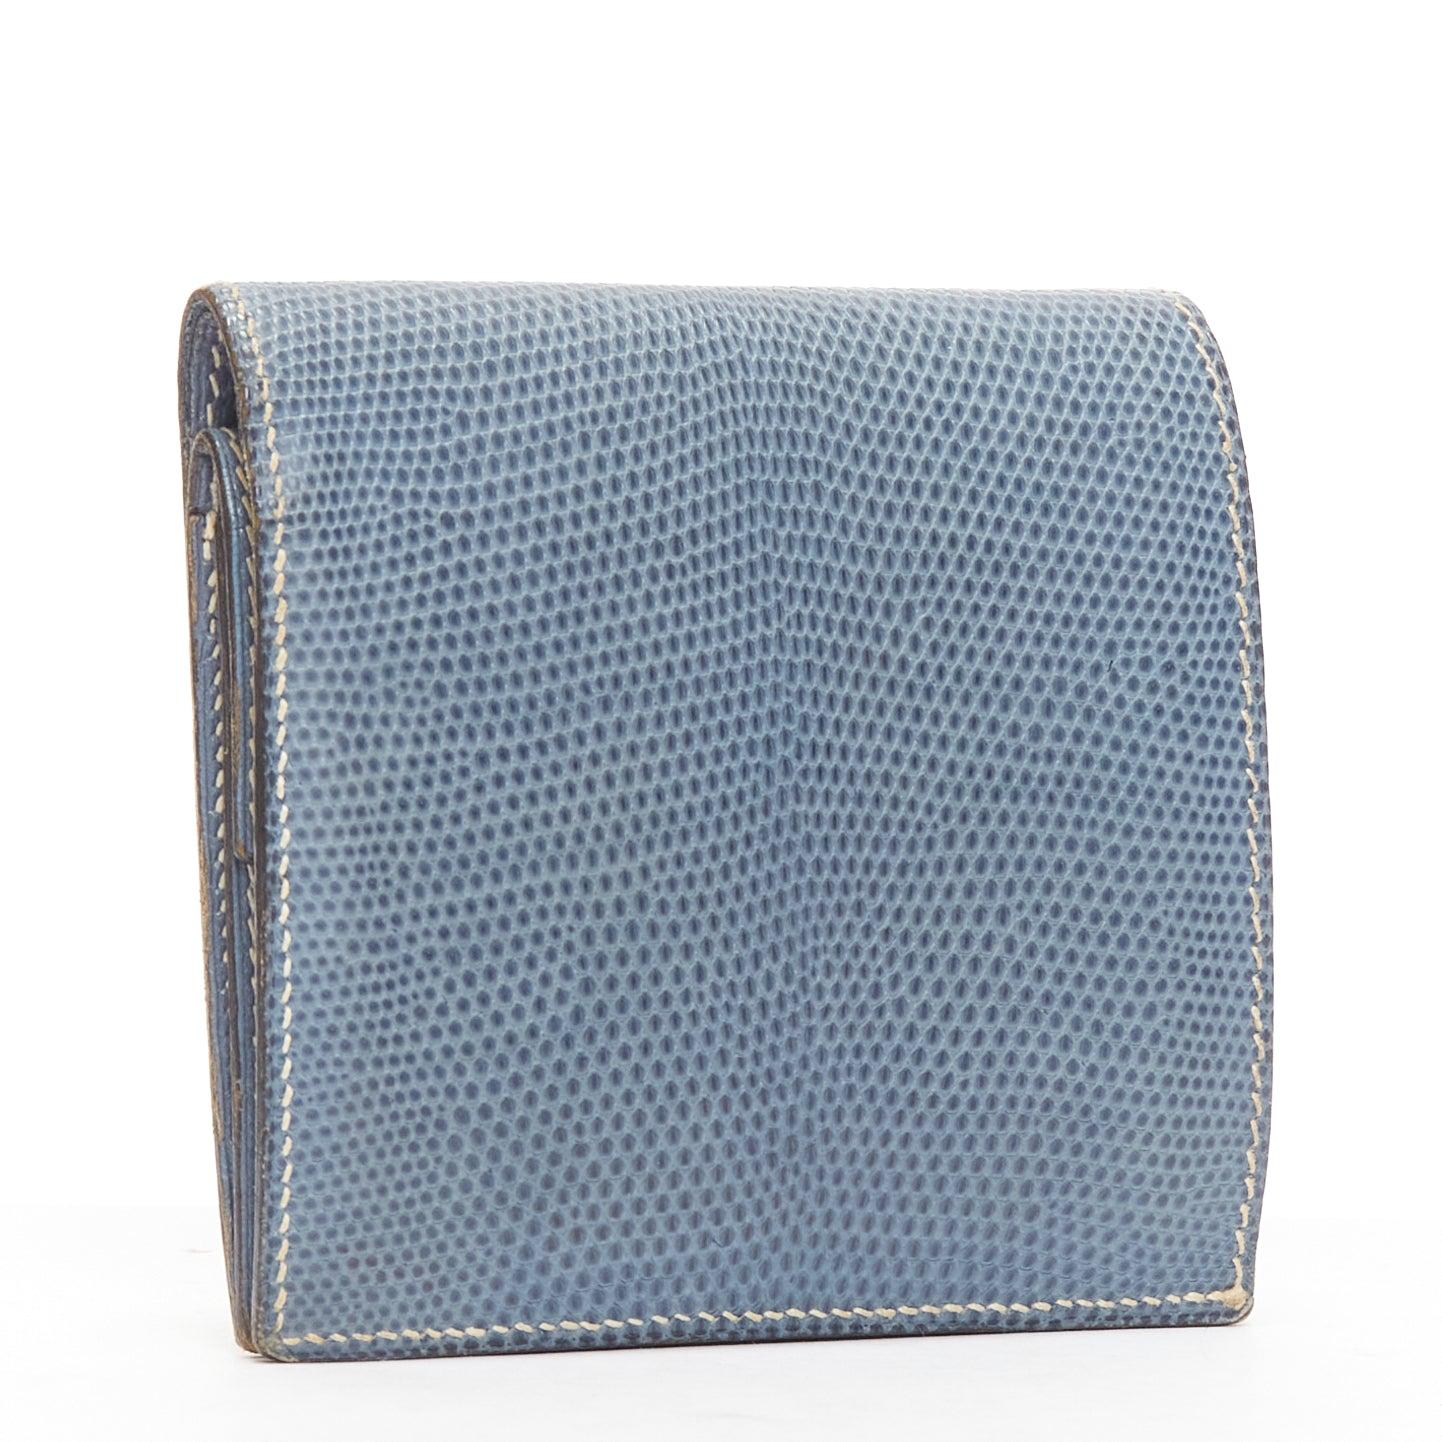 HERMES blue scaled leather silver logo bifold coins wallet
Reference: NILI/A00046
Brand: Hermes
Material: Leather
Color: Blue
Pattern: Animal Print
Closure: Snap Buttons
Lining: Blue Leather
Extra Details: Coin and card compartments.
Made in: